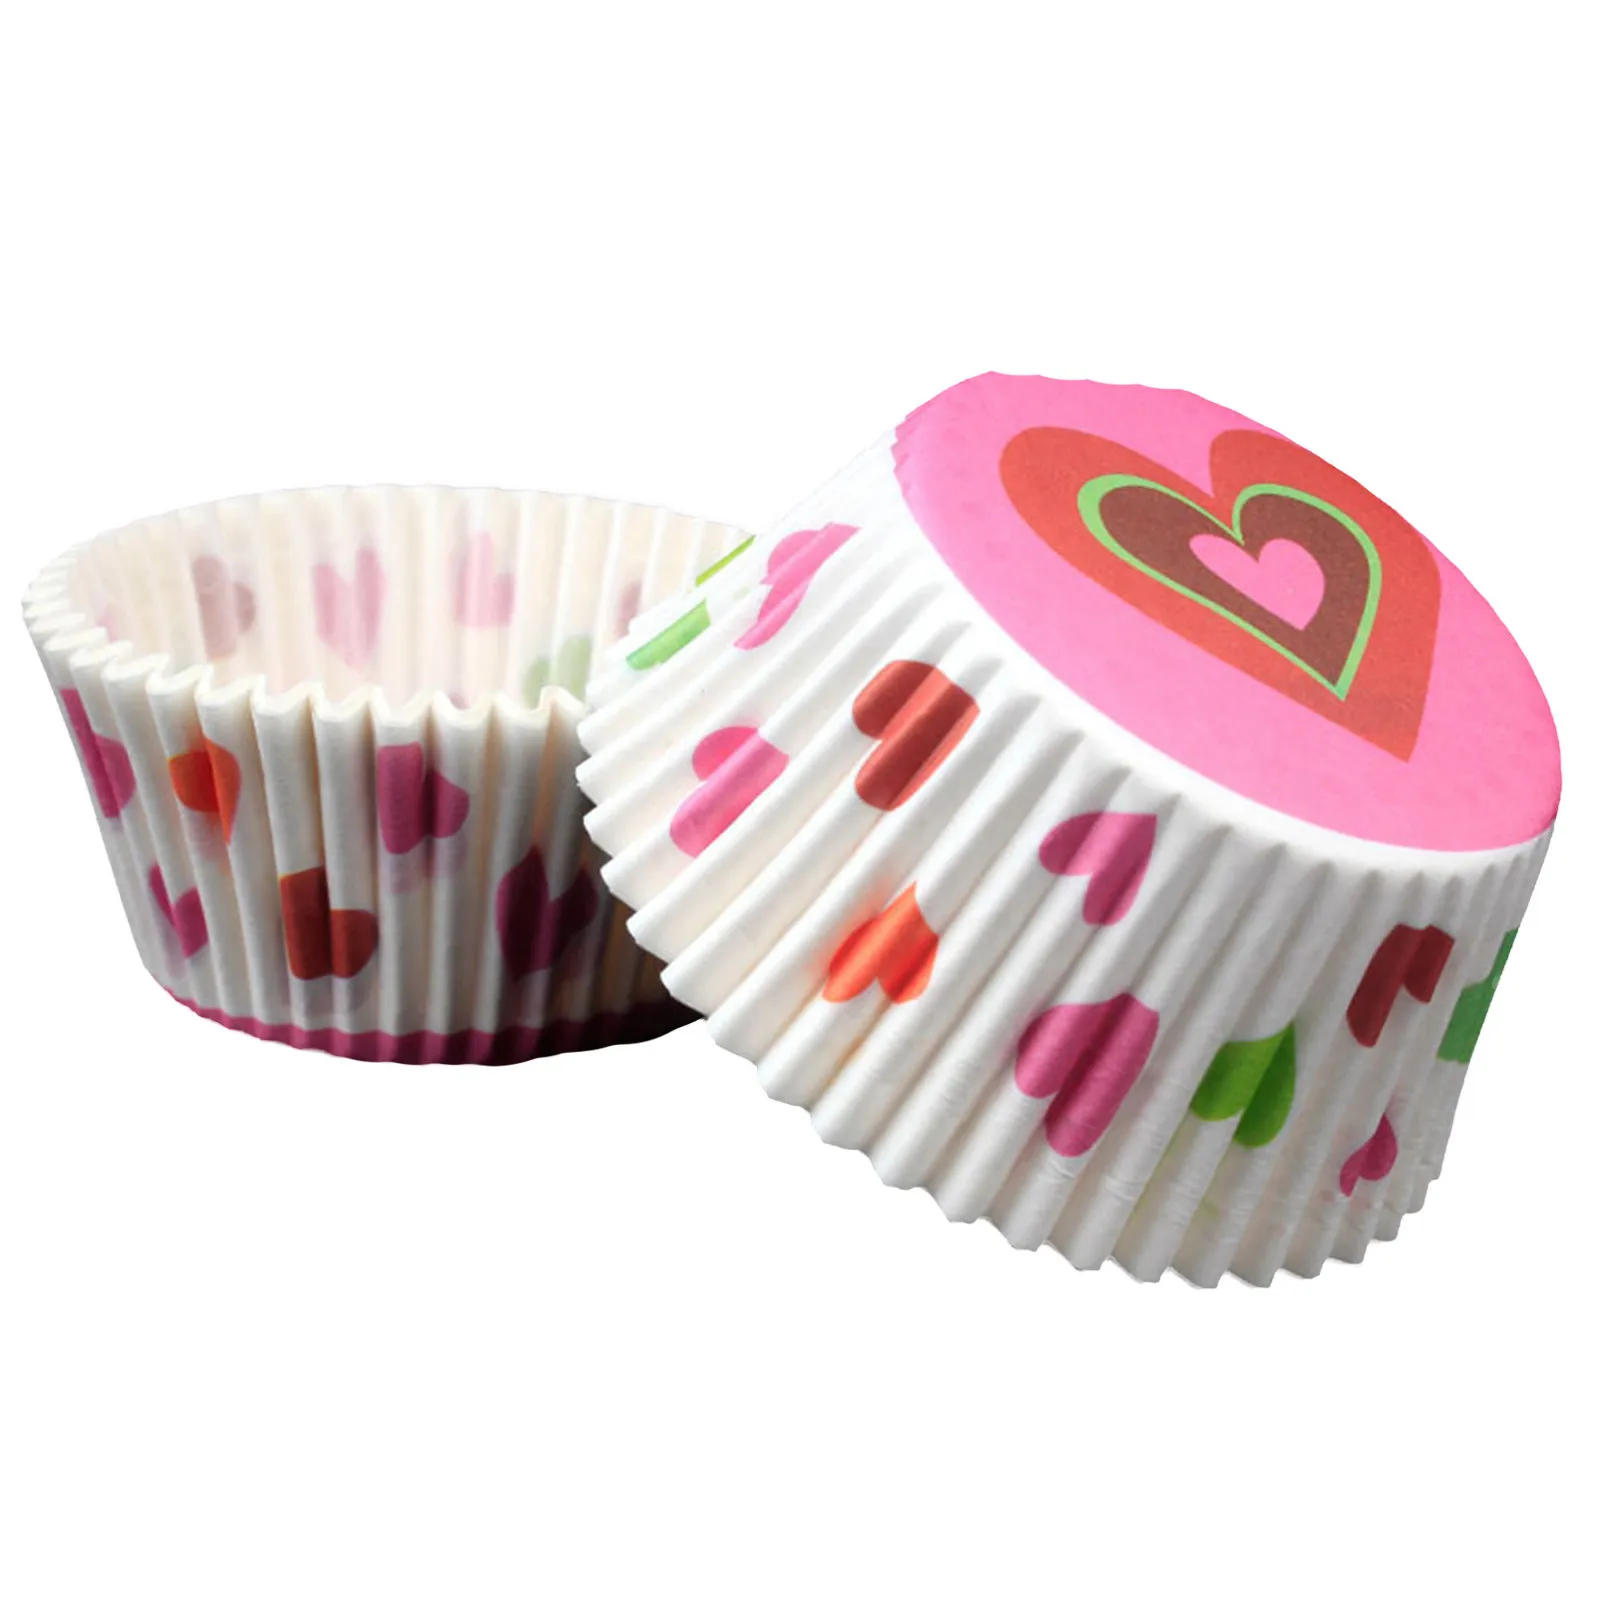 

New 50Pcs Paper Cake Cup Cupcake Egg Tart Mold Cookie Pudding Mould Makers Cupcake Liners Baking Pastry Tools Jelly mould L*5